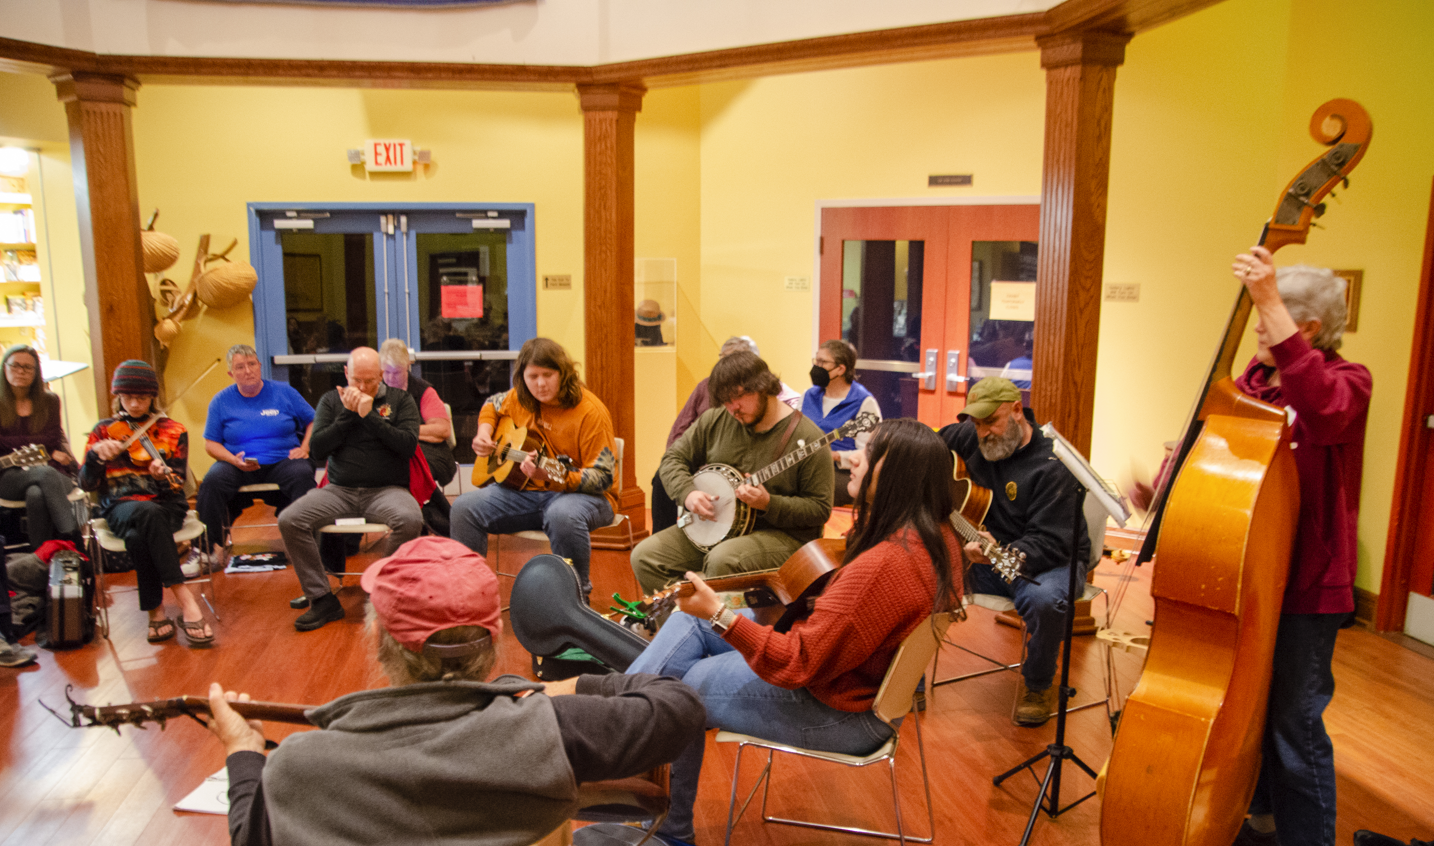 Orchestra+Appalachia+Continues+Weekly+Jam+Sessions